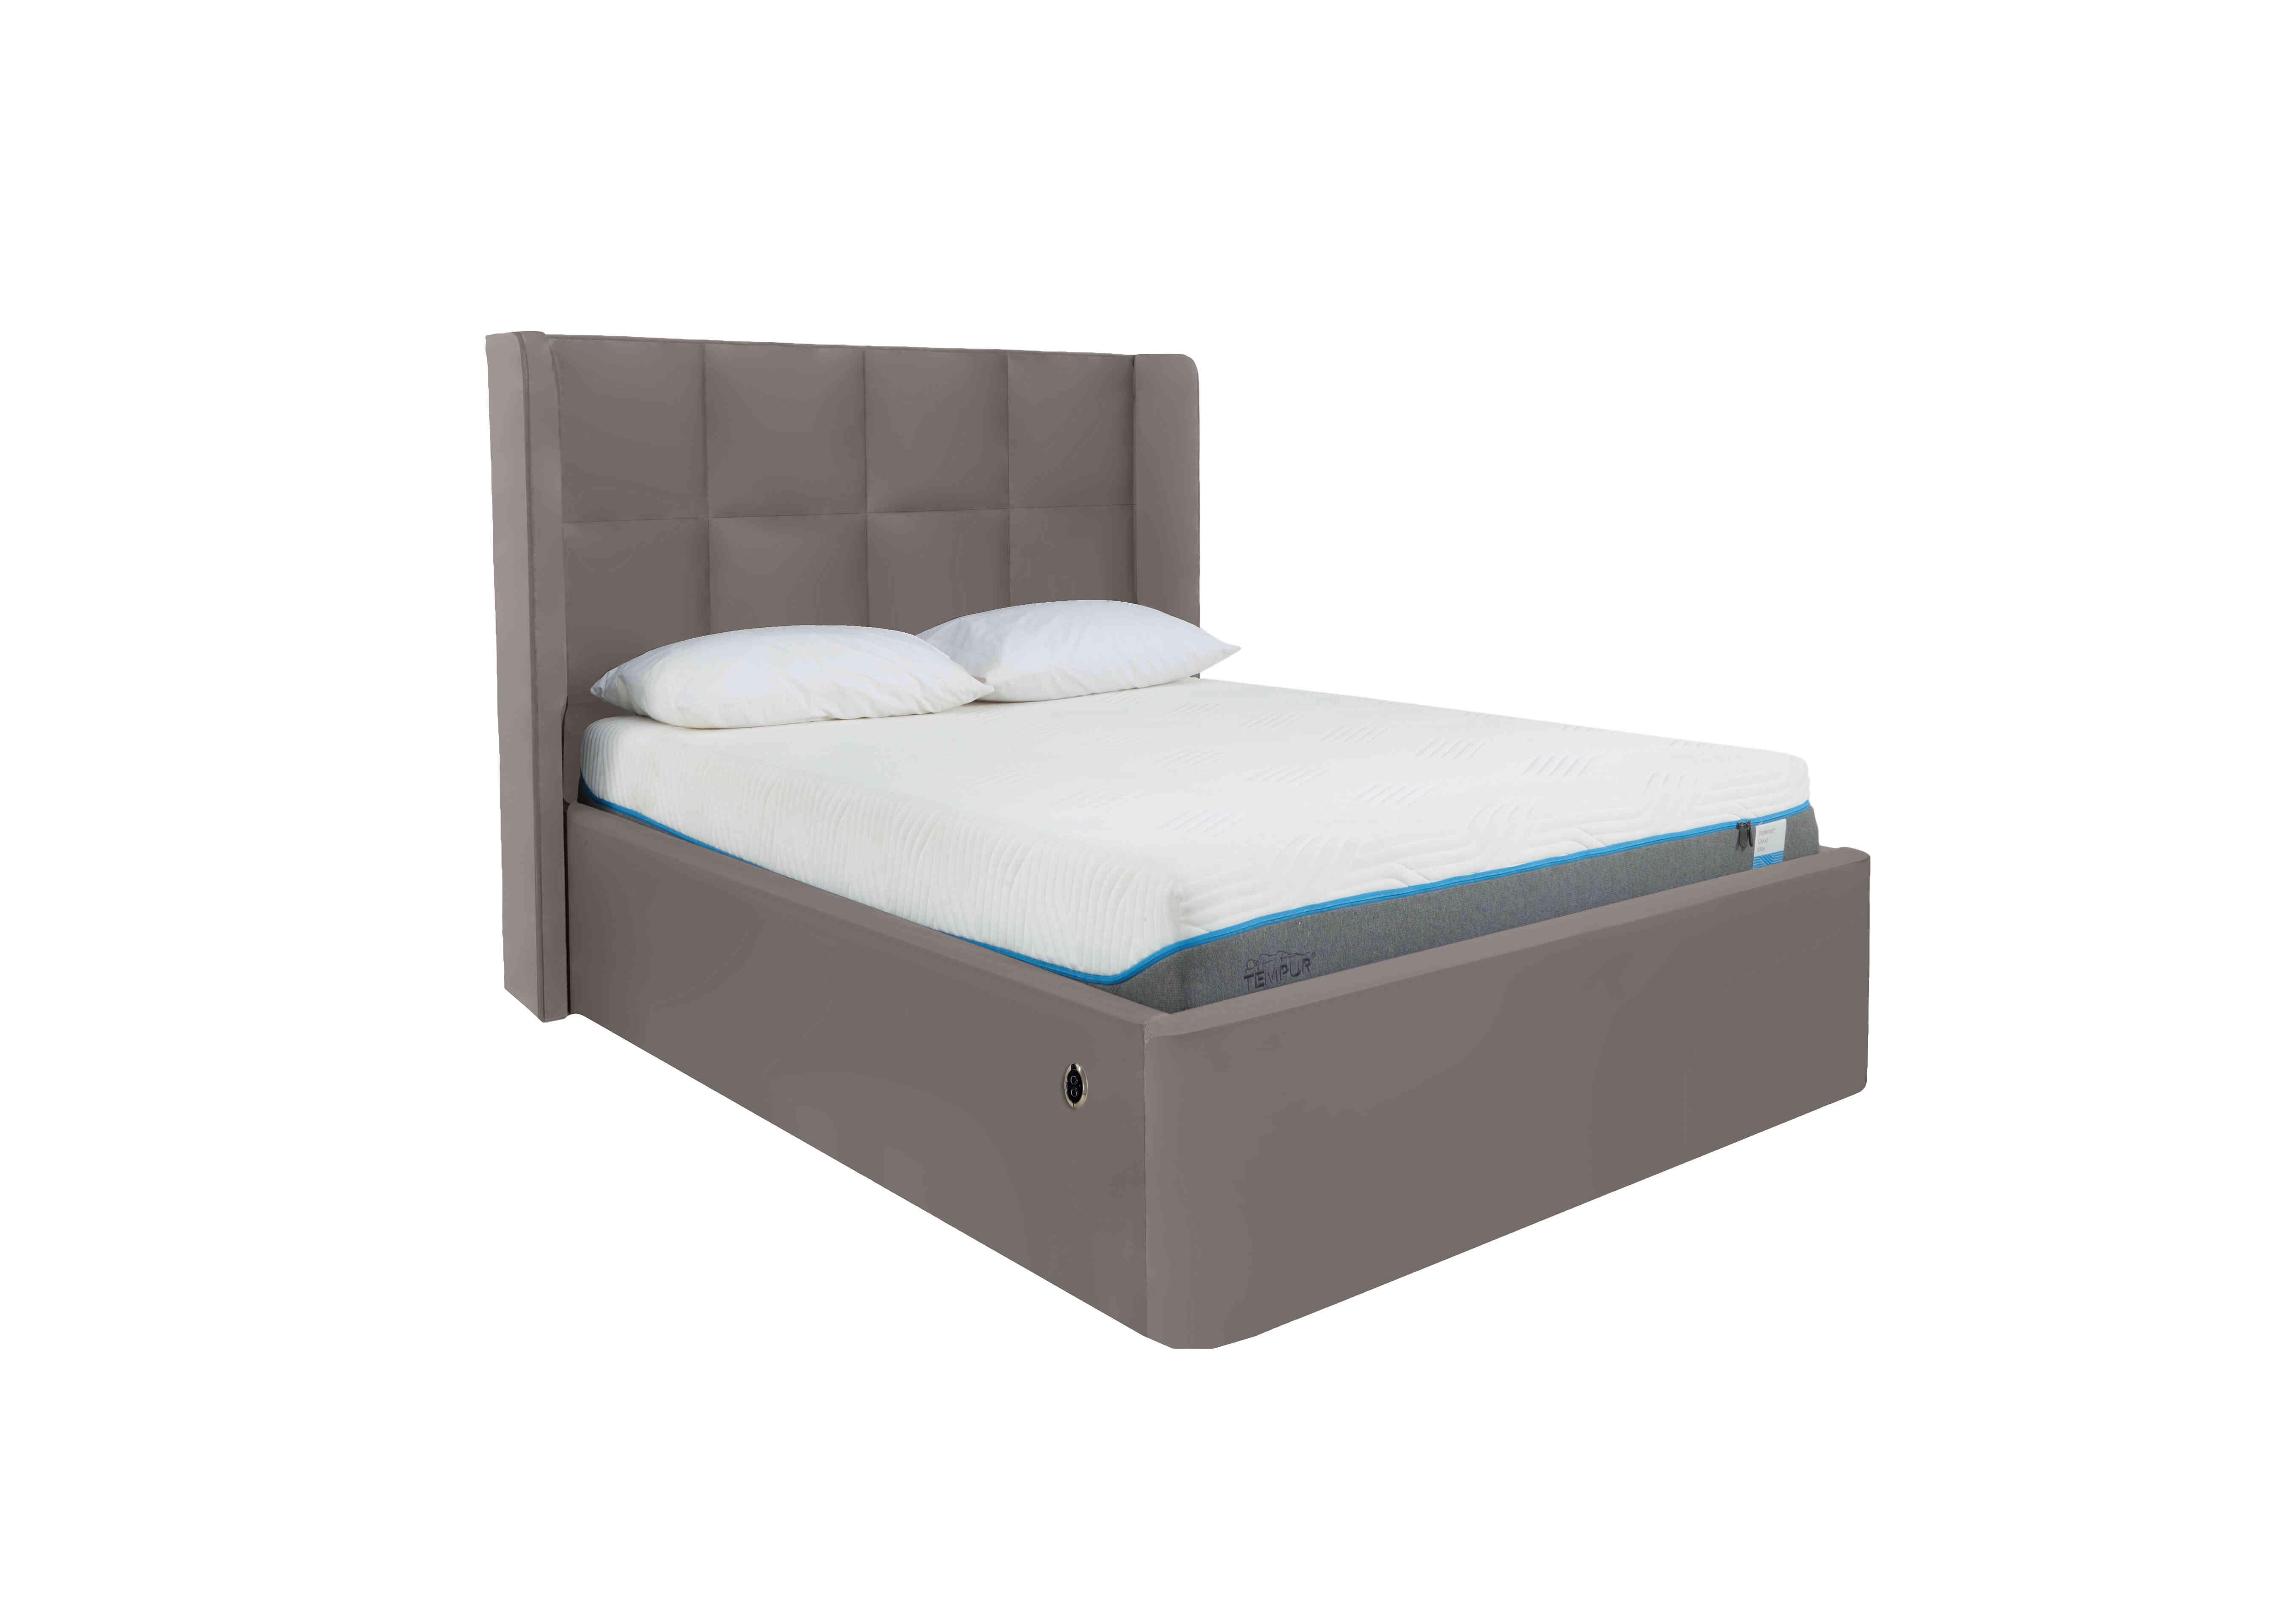 Shiva Electric Ottoman Bed Frame in Sanderson Potters Clay on Furniture Village